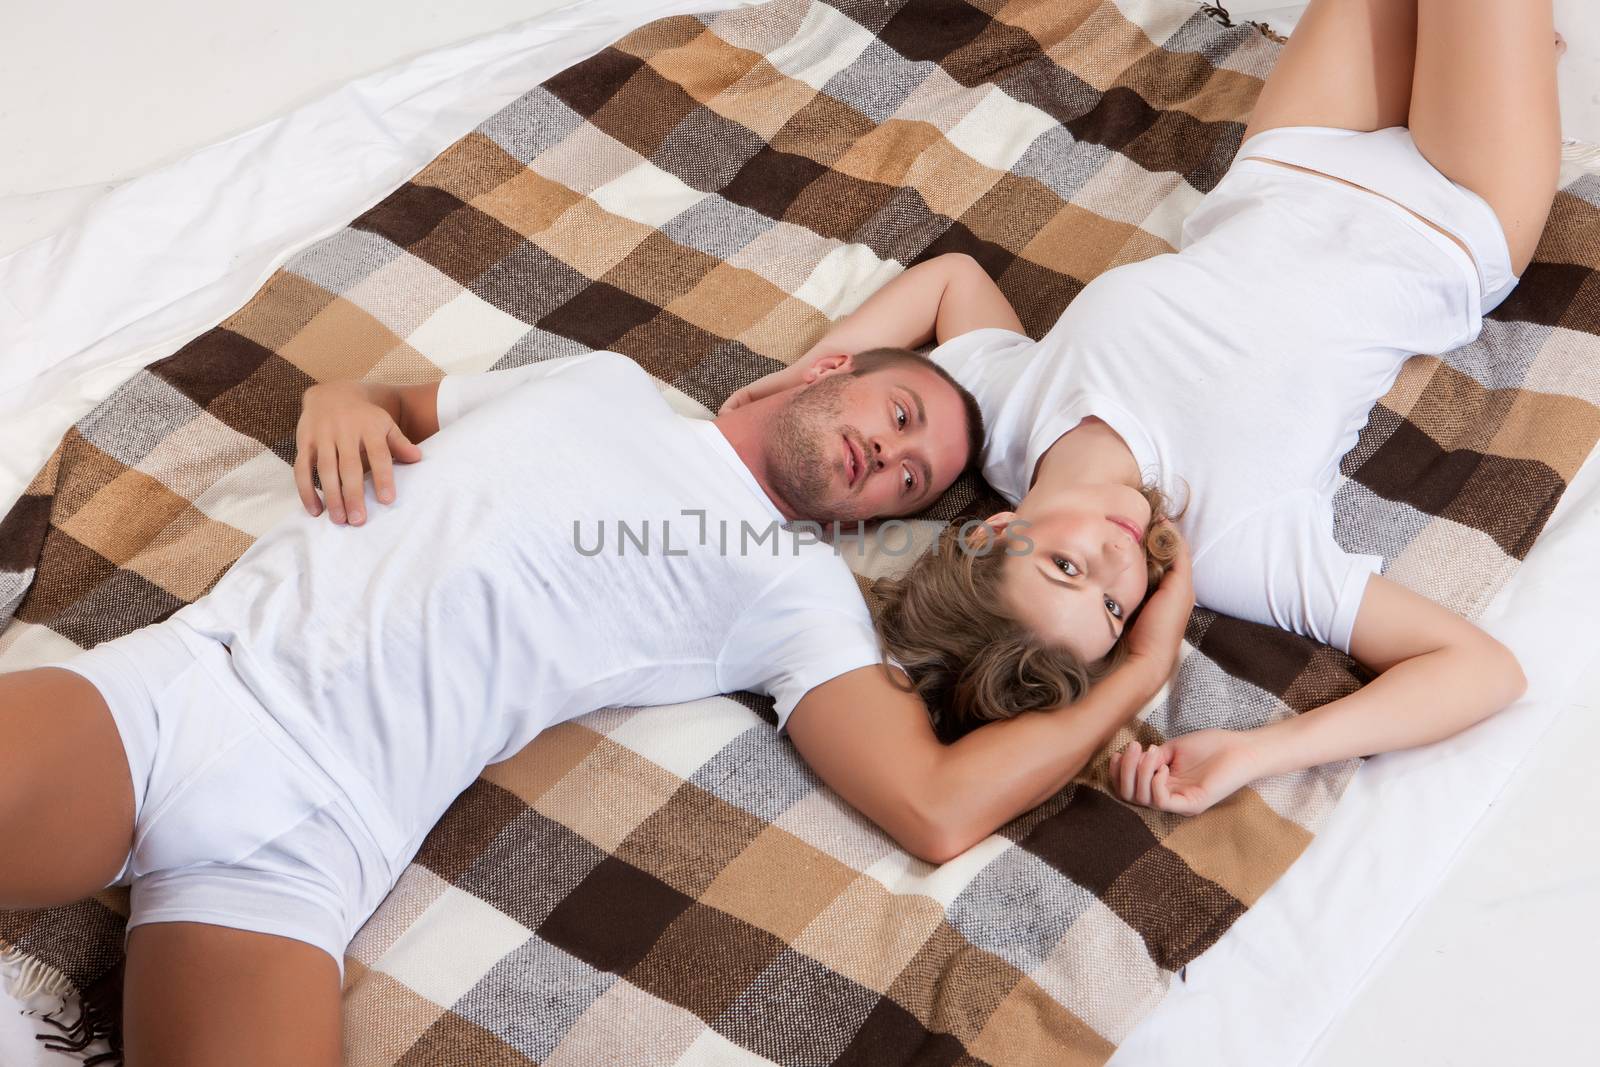 Young beautiful woman and man in lingerie with toys and home accessories